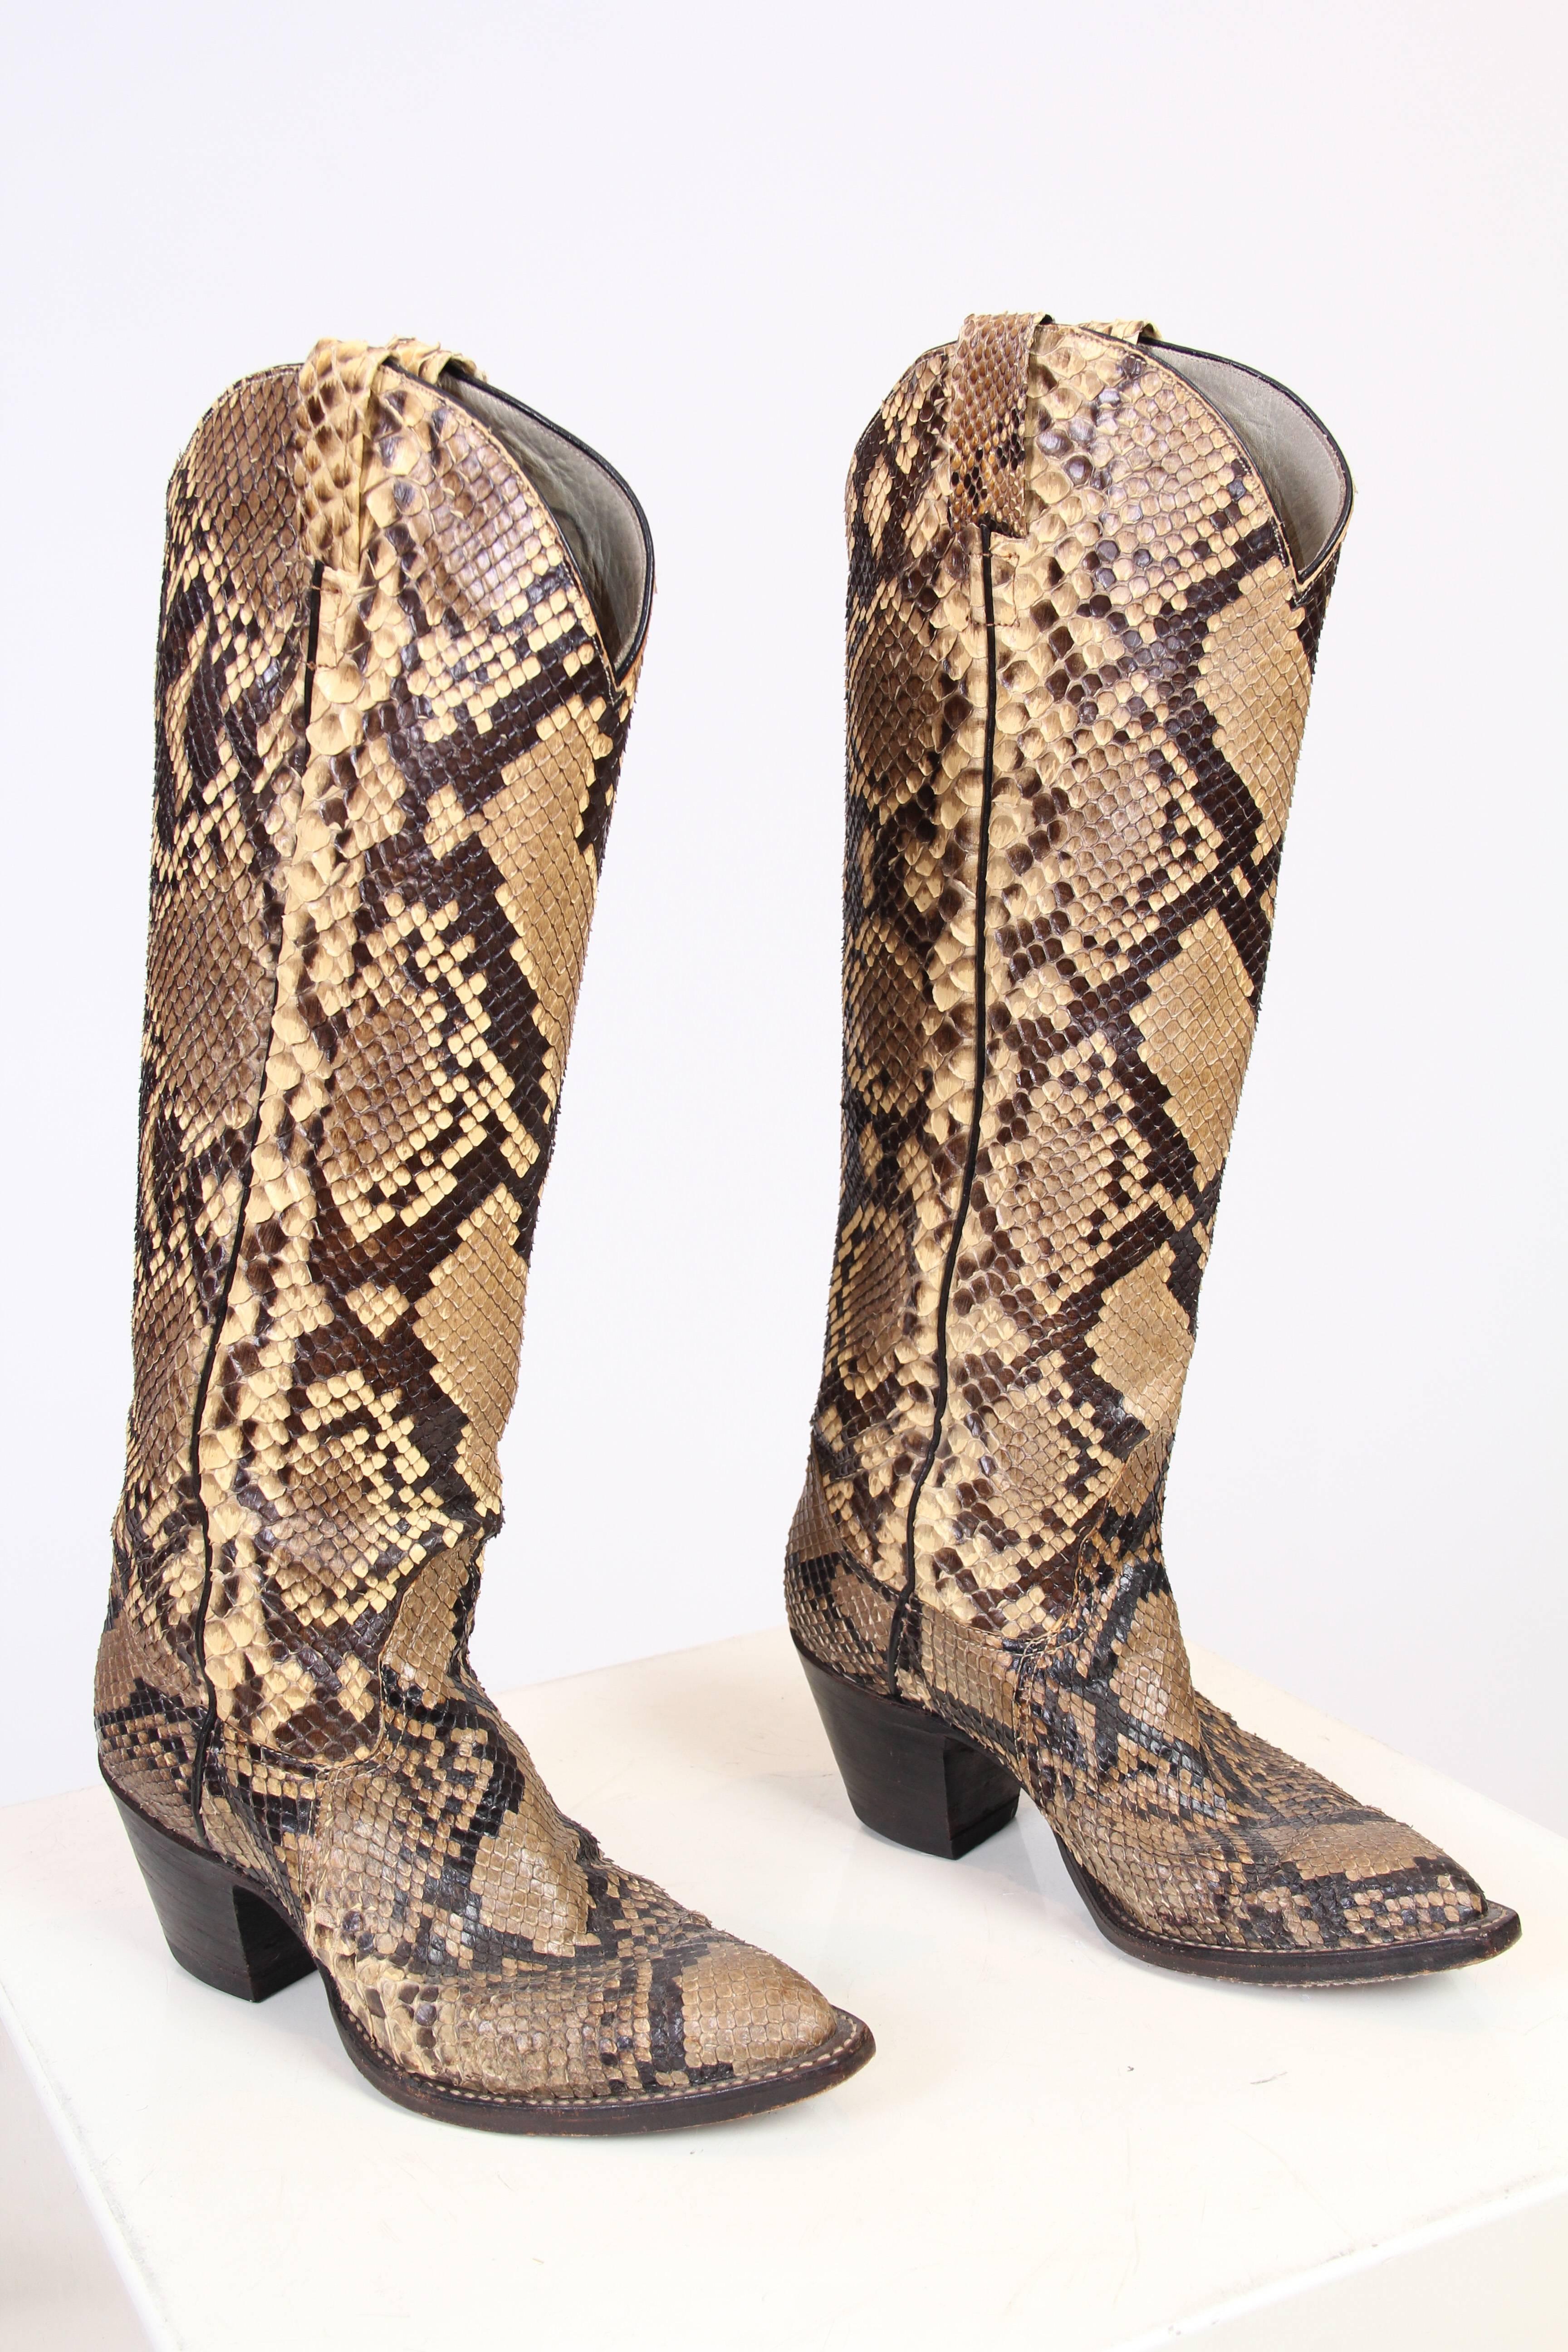 This is a pair of classic snakeskin cowboy boots in classic shades of tan and chocolate brown. In these boots, the ultimate symbol of the American West is mixed with the glamour of exotic materials and natural patterns to create a striking visual